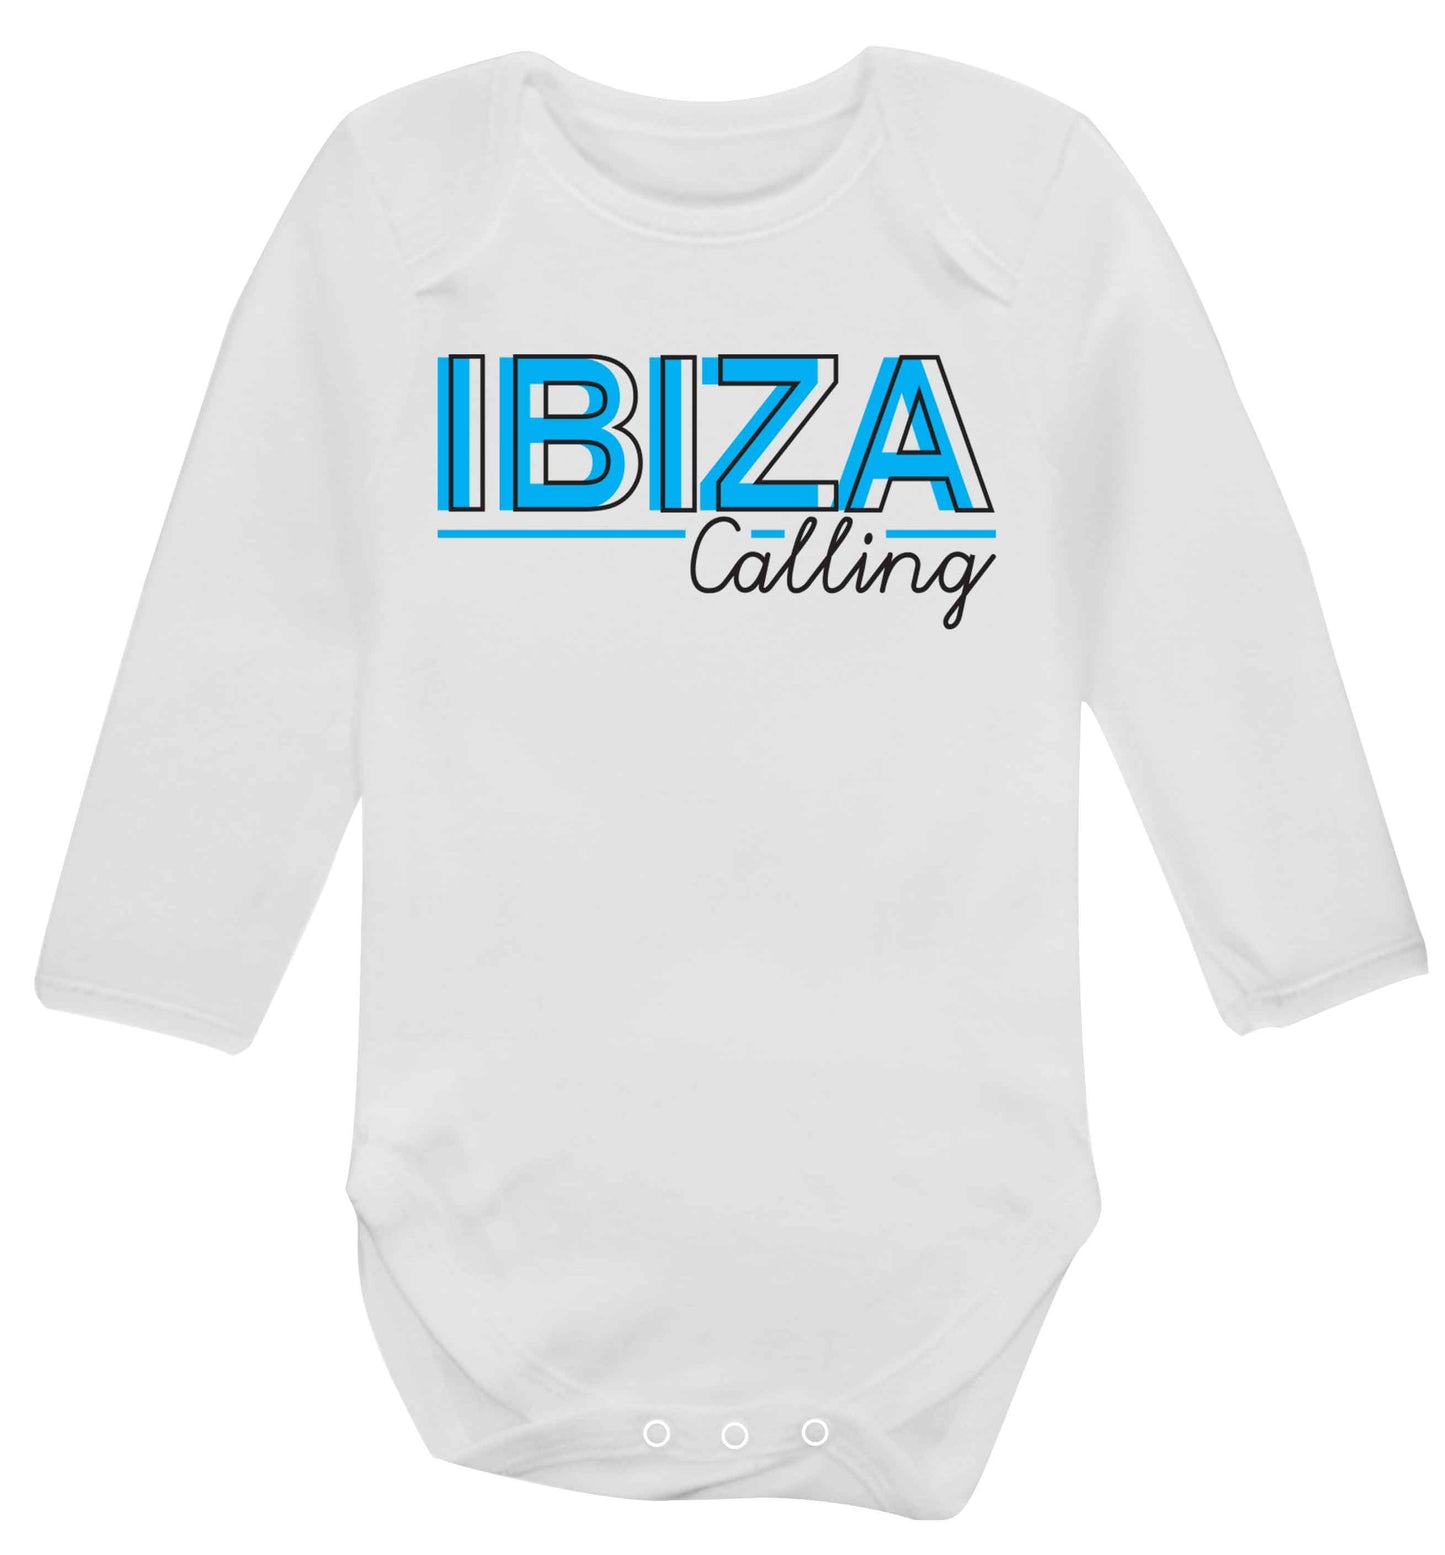 Ibiza calling Baby Vest long sleeved white 6-12 months